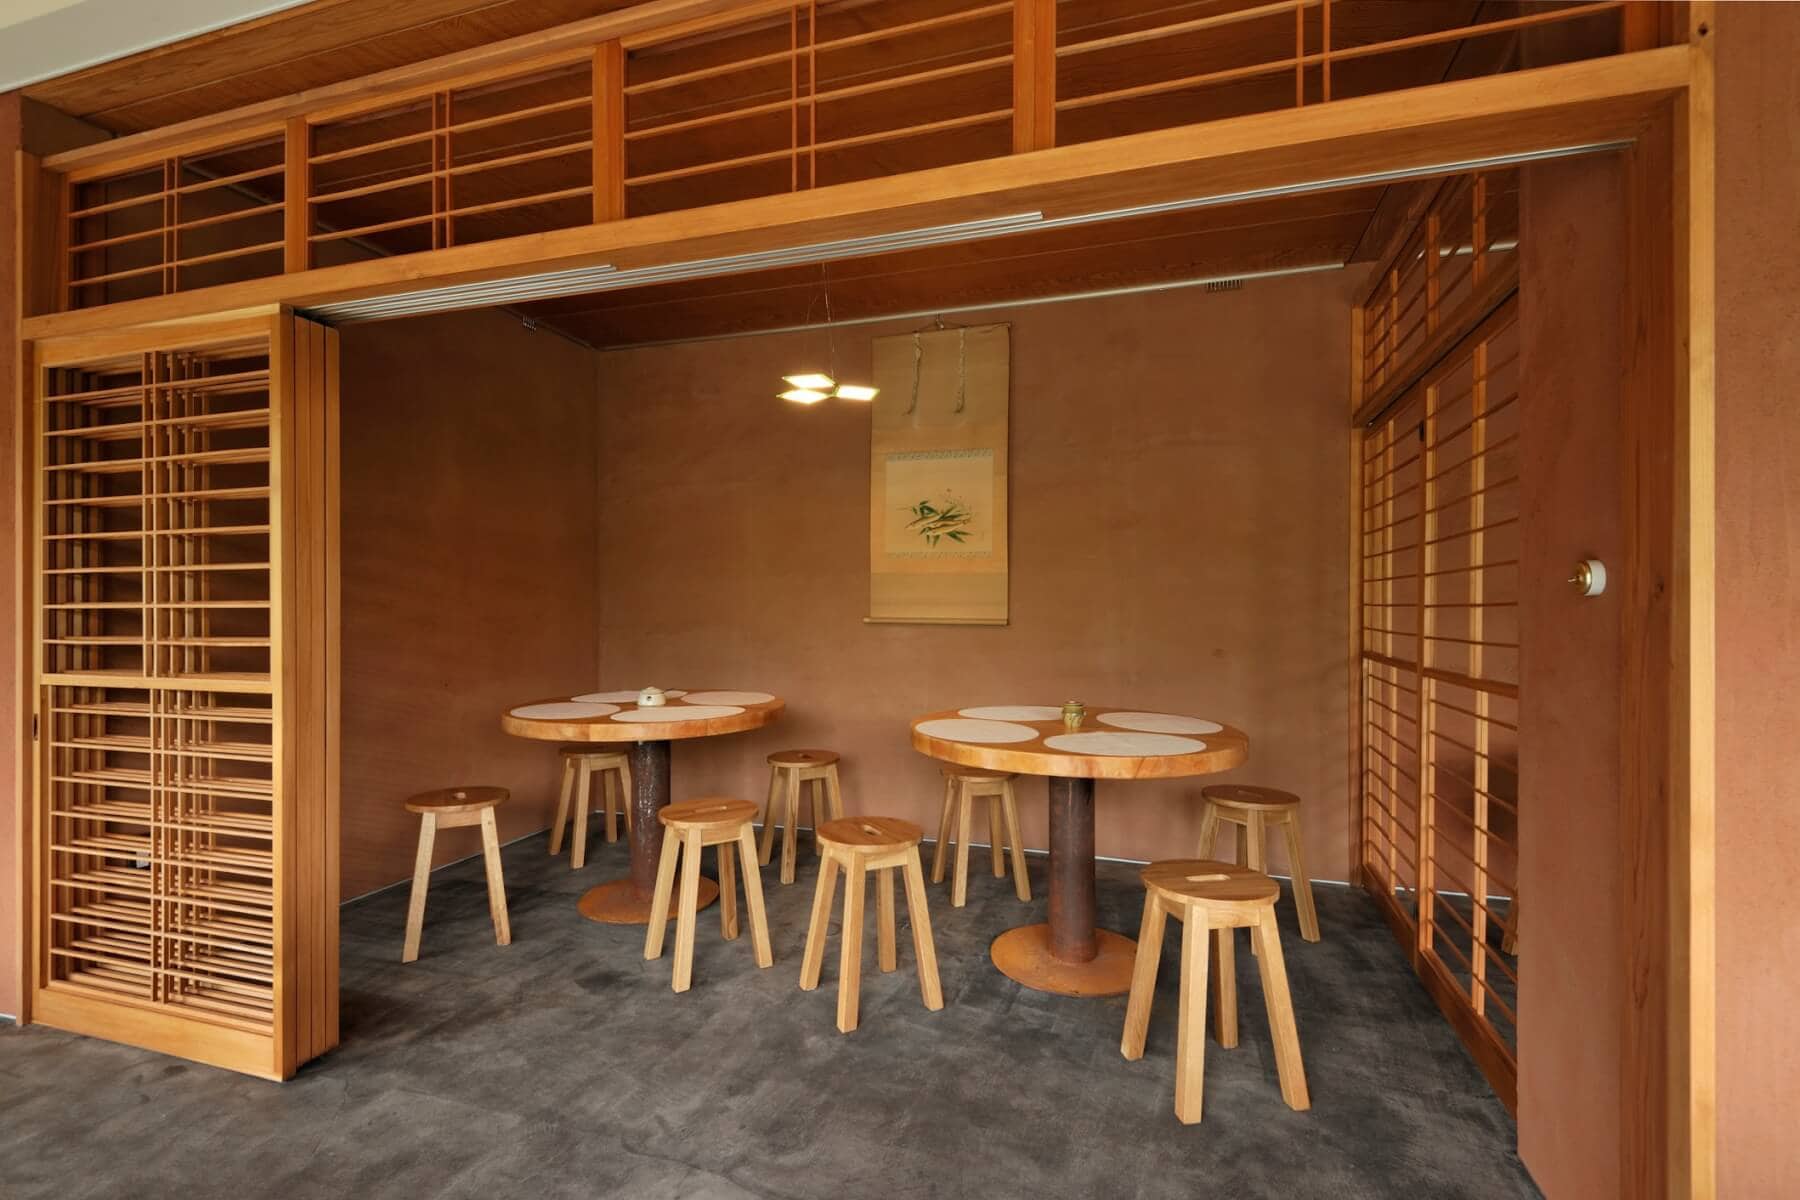 Garden café Nishiki in Yamagata with pendant OLED luminaire Floating x 3wings above the table